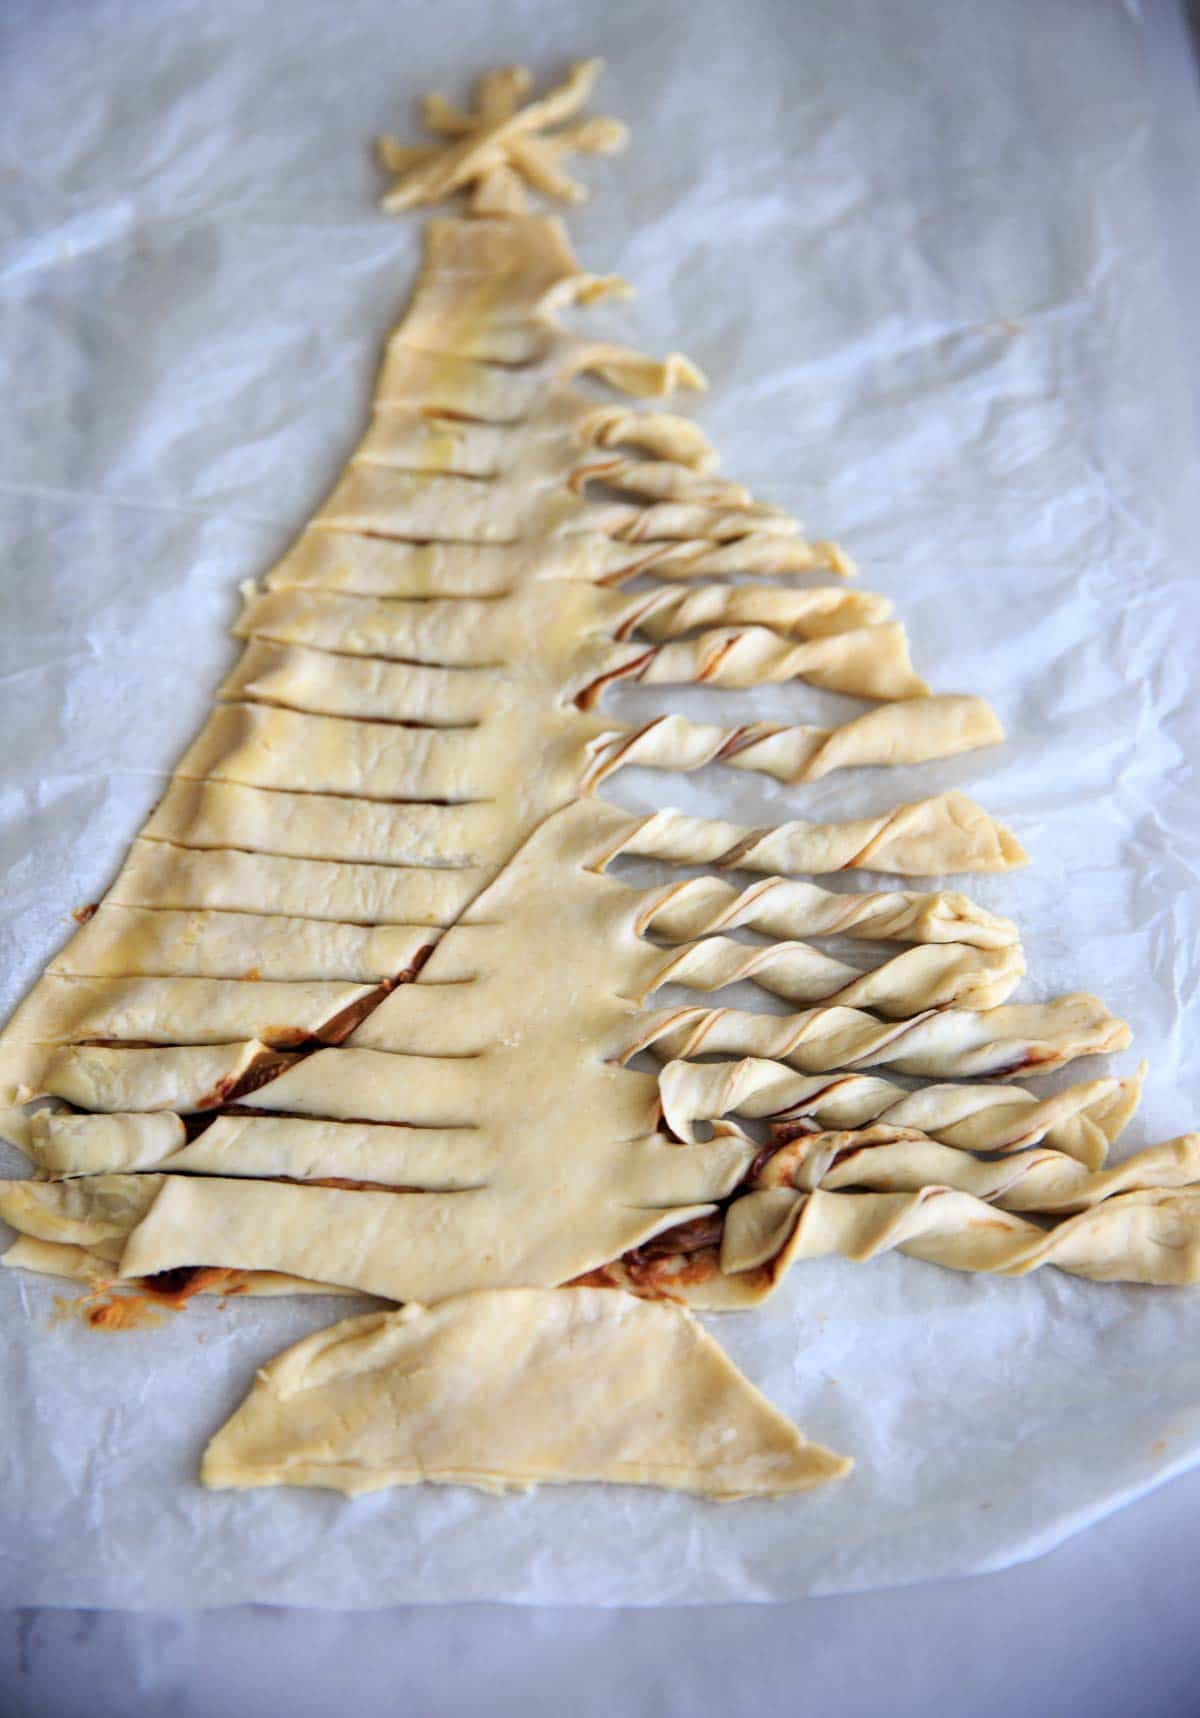 Twist the branches of pastry to make the design.